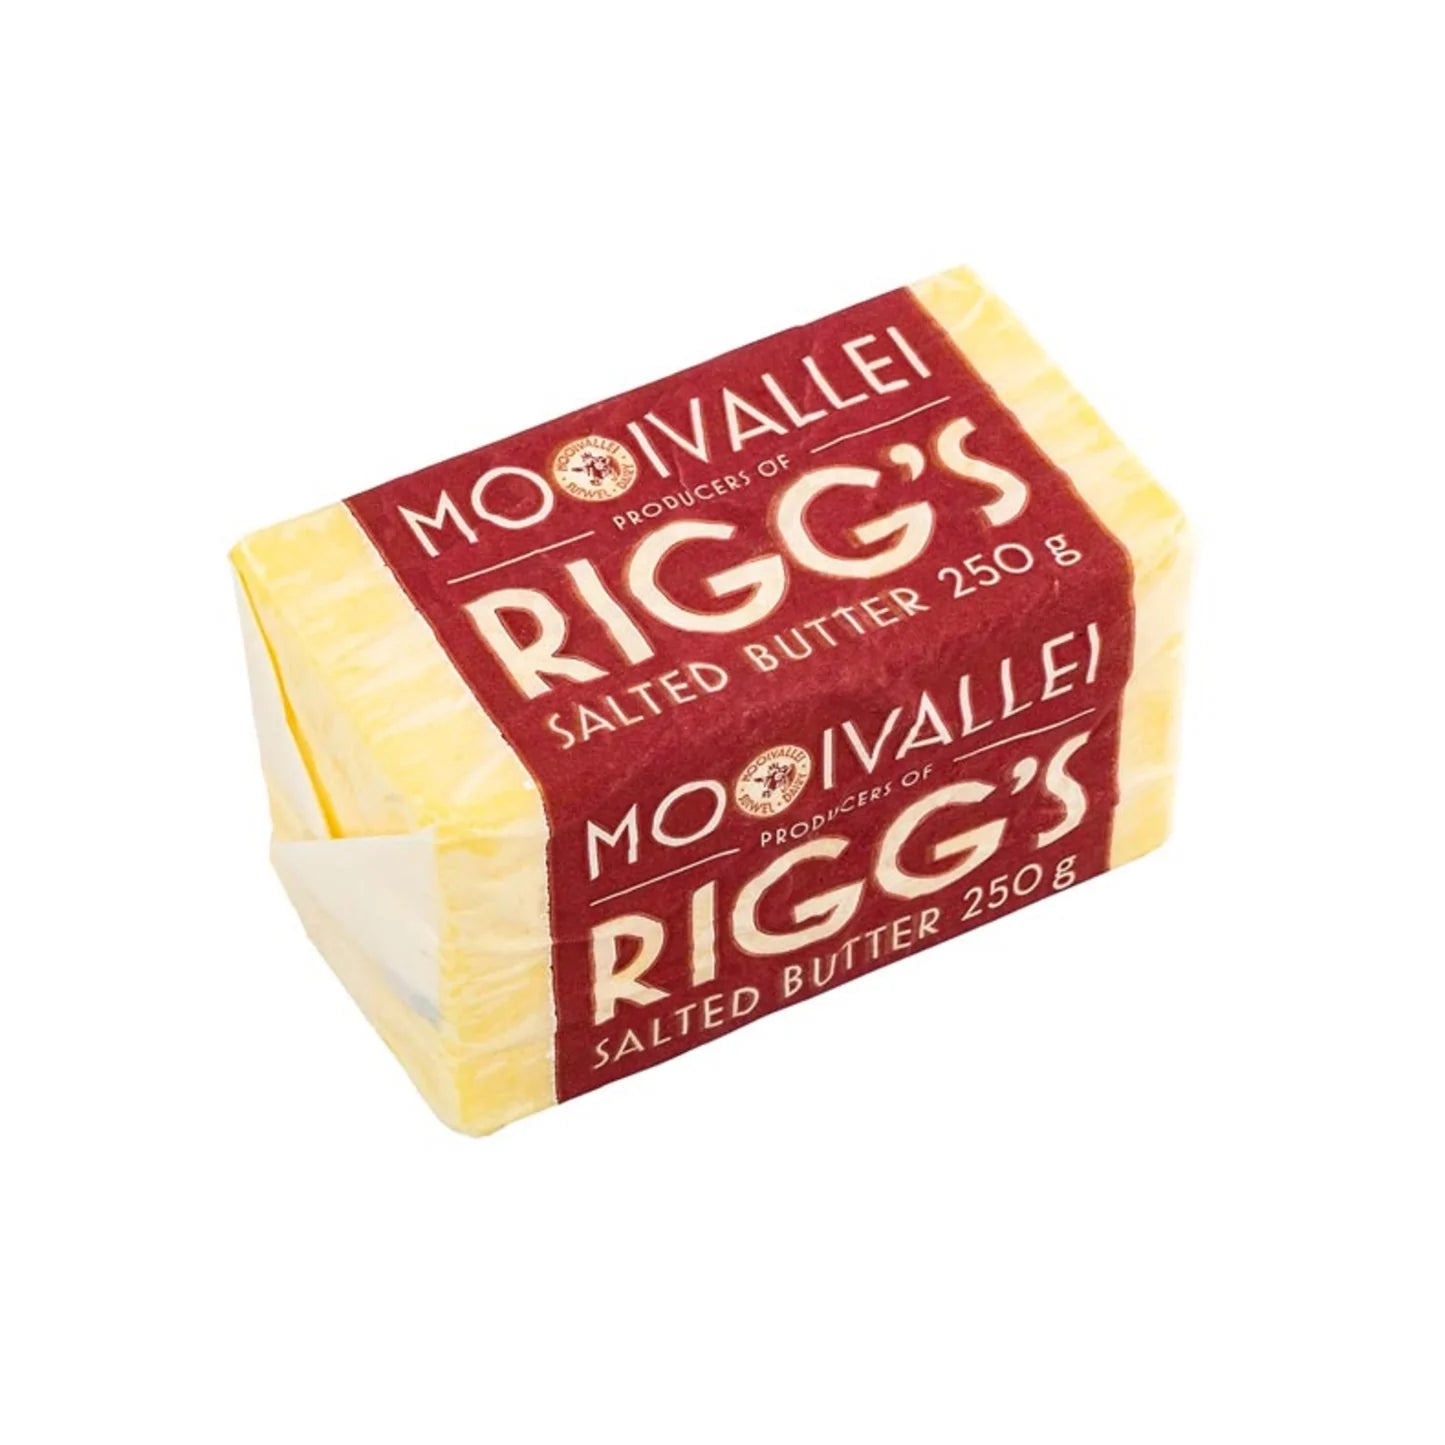 Riggs Butter (250g)